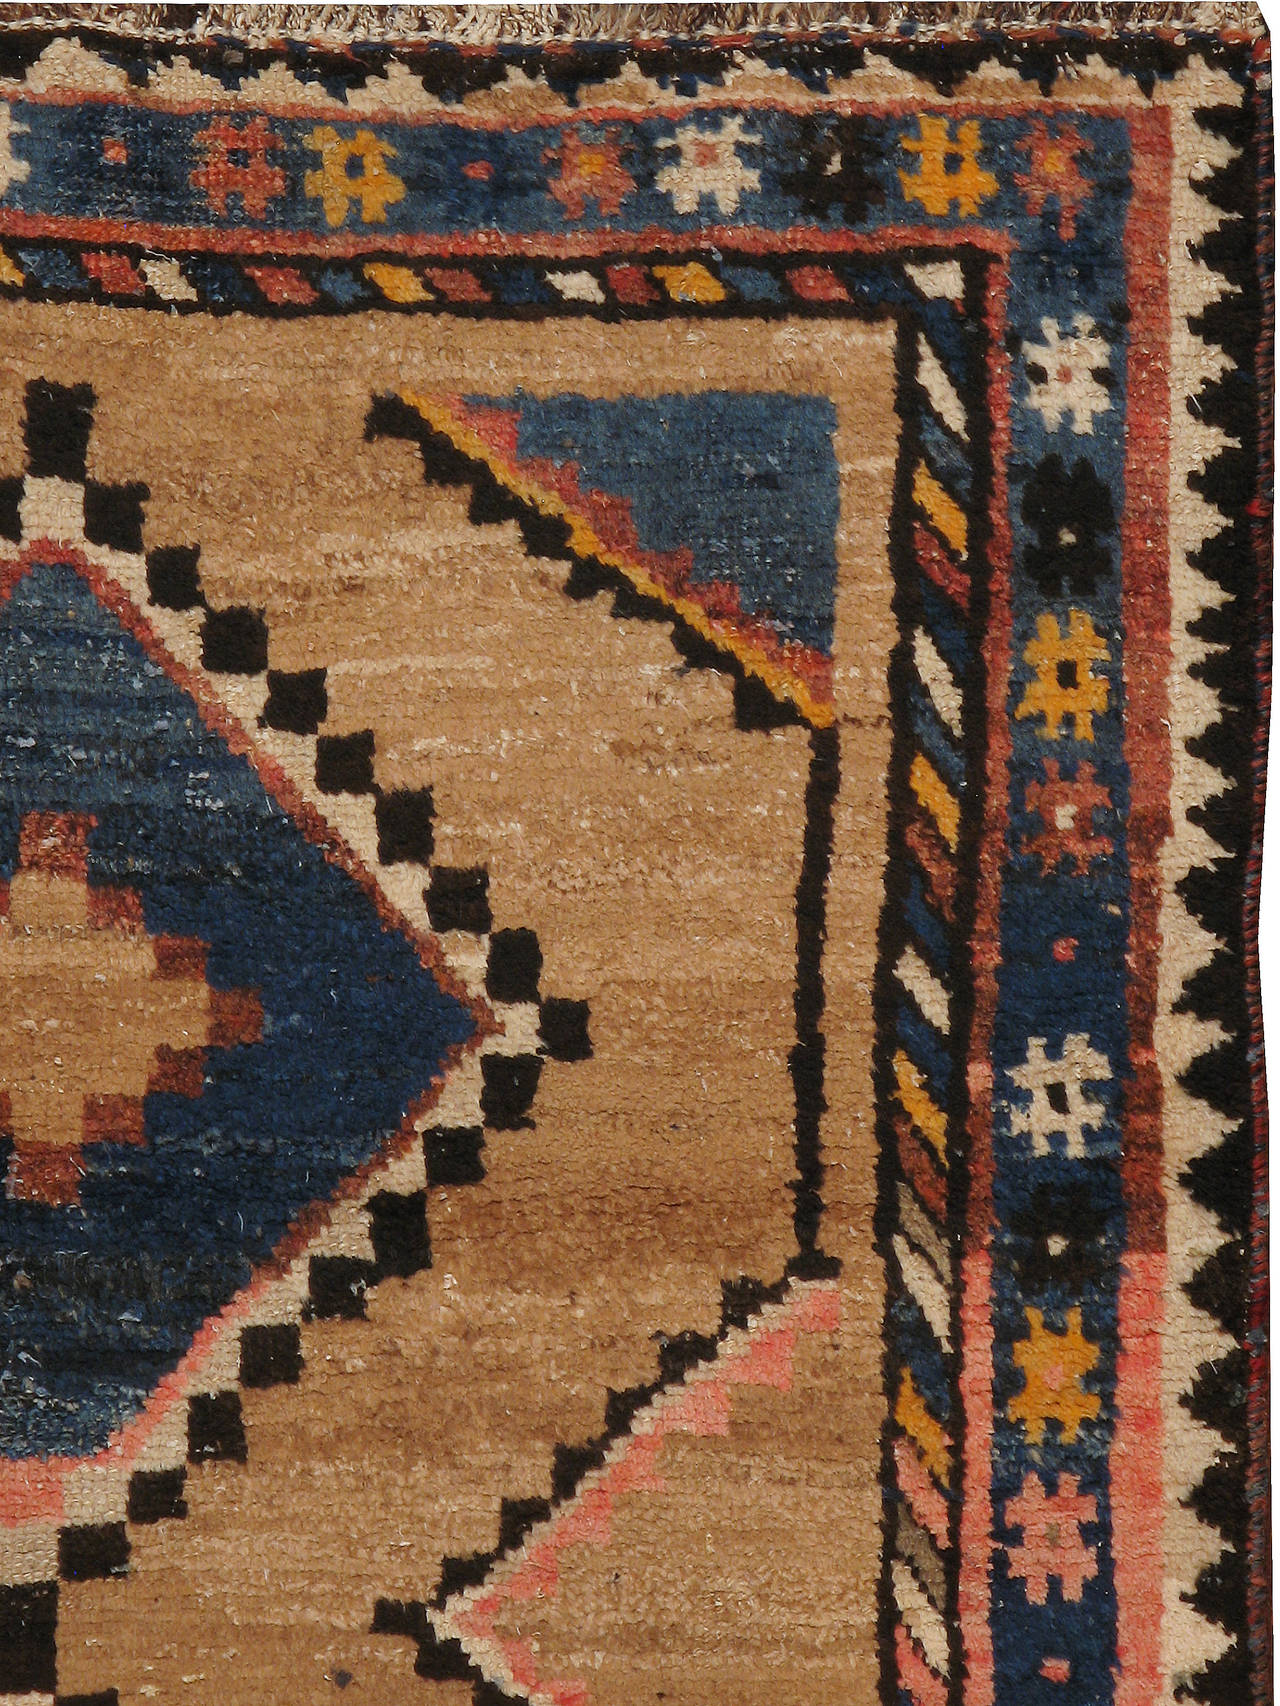 An vintage Persian Gabbeh carpet from the second quarter of the 20th century.